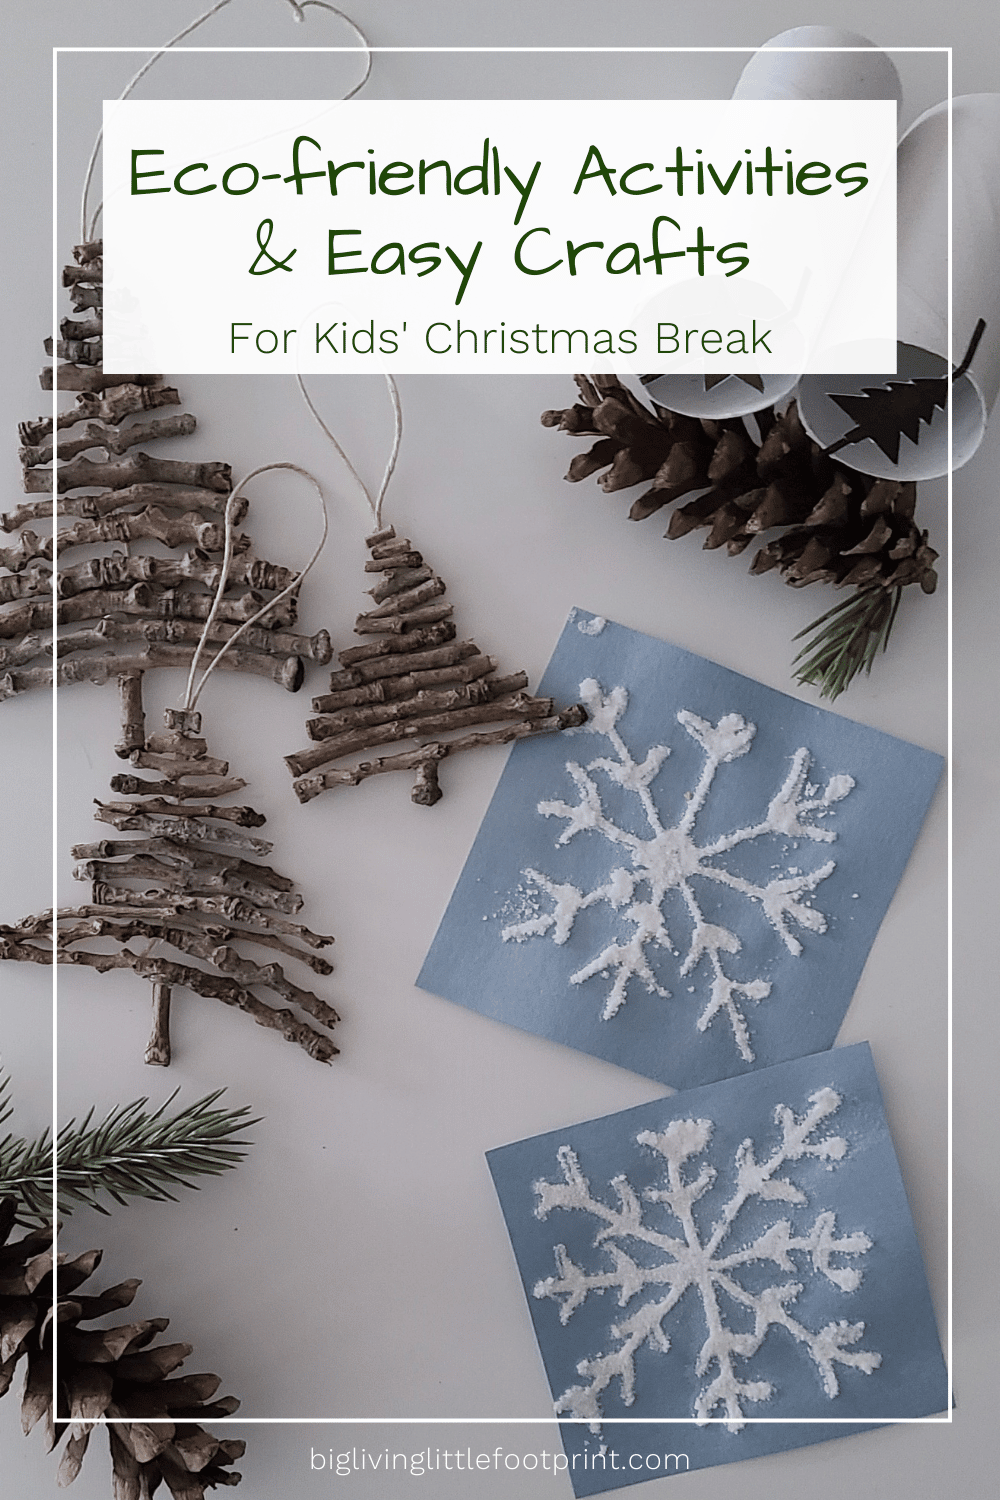 Eco-friendly Activities & Easy Crafts For Kids’ Christmas Break